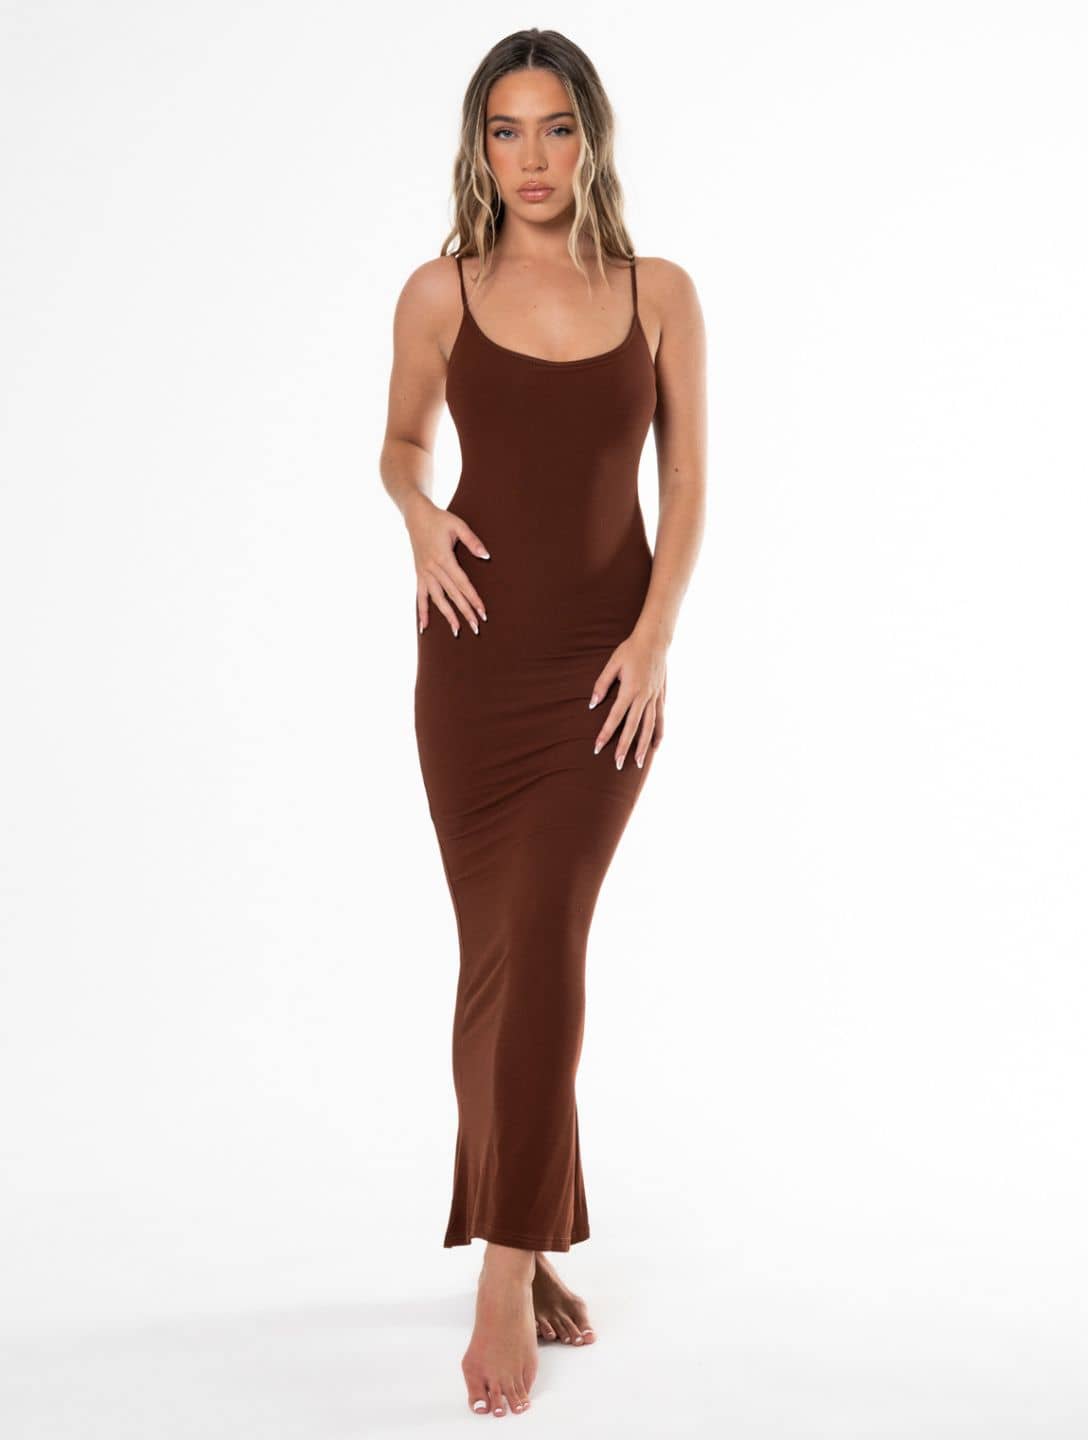 Legease Floral Midriff Waist Shaper Dress is Uniquely Designed With A Tie  Back Feature Highlighting Your Elegant Shape - Maxi Summer Dress – LegEase™